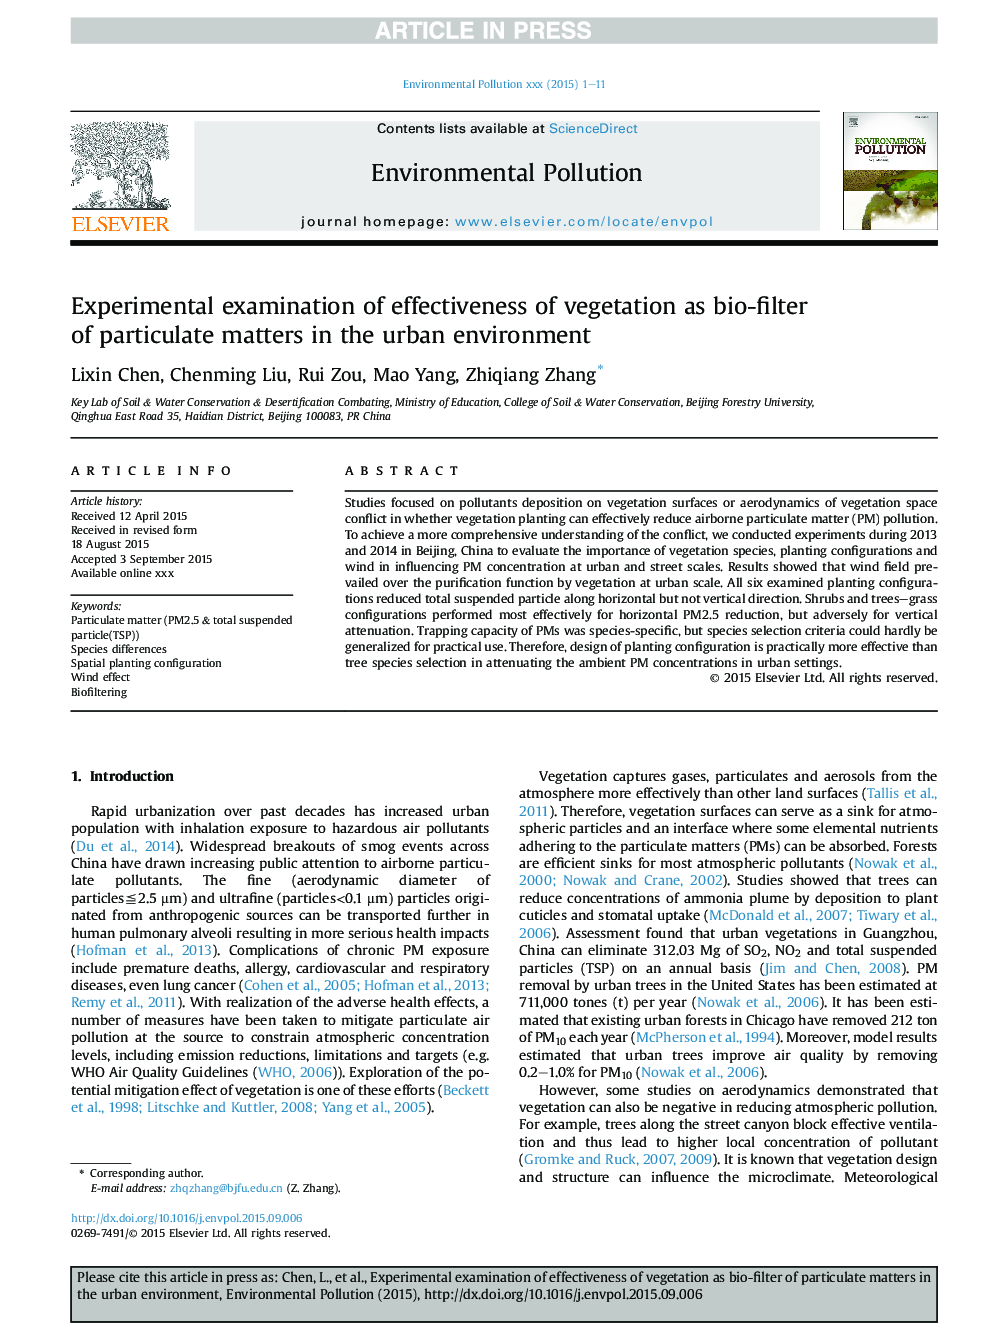 Experimental examination of effectiveness of vegetation as bio-filter of particulate matters in the urban environment